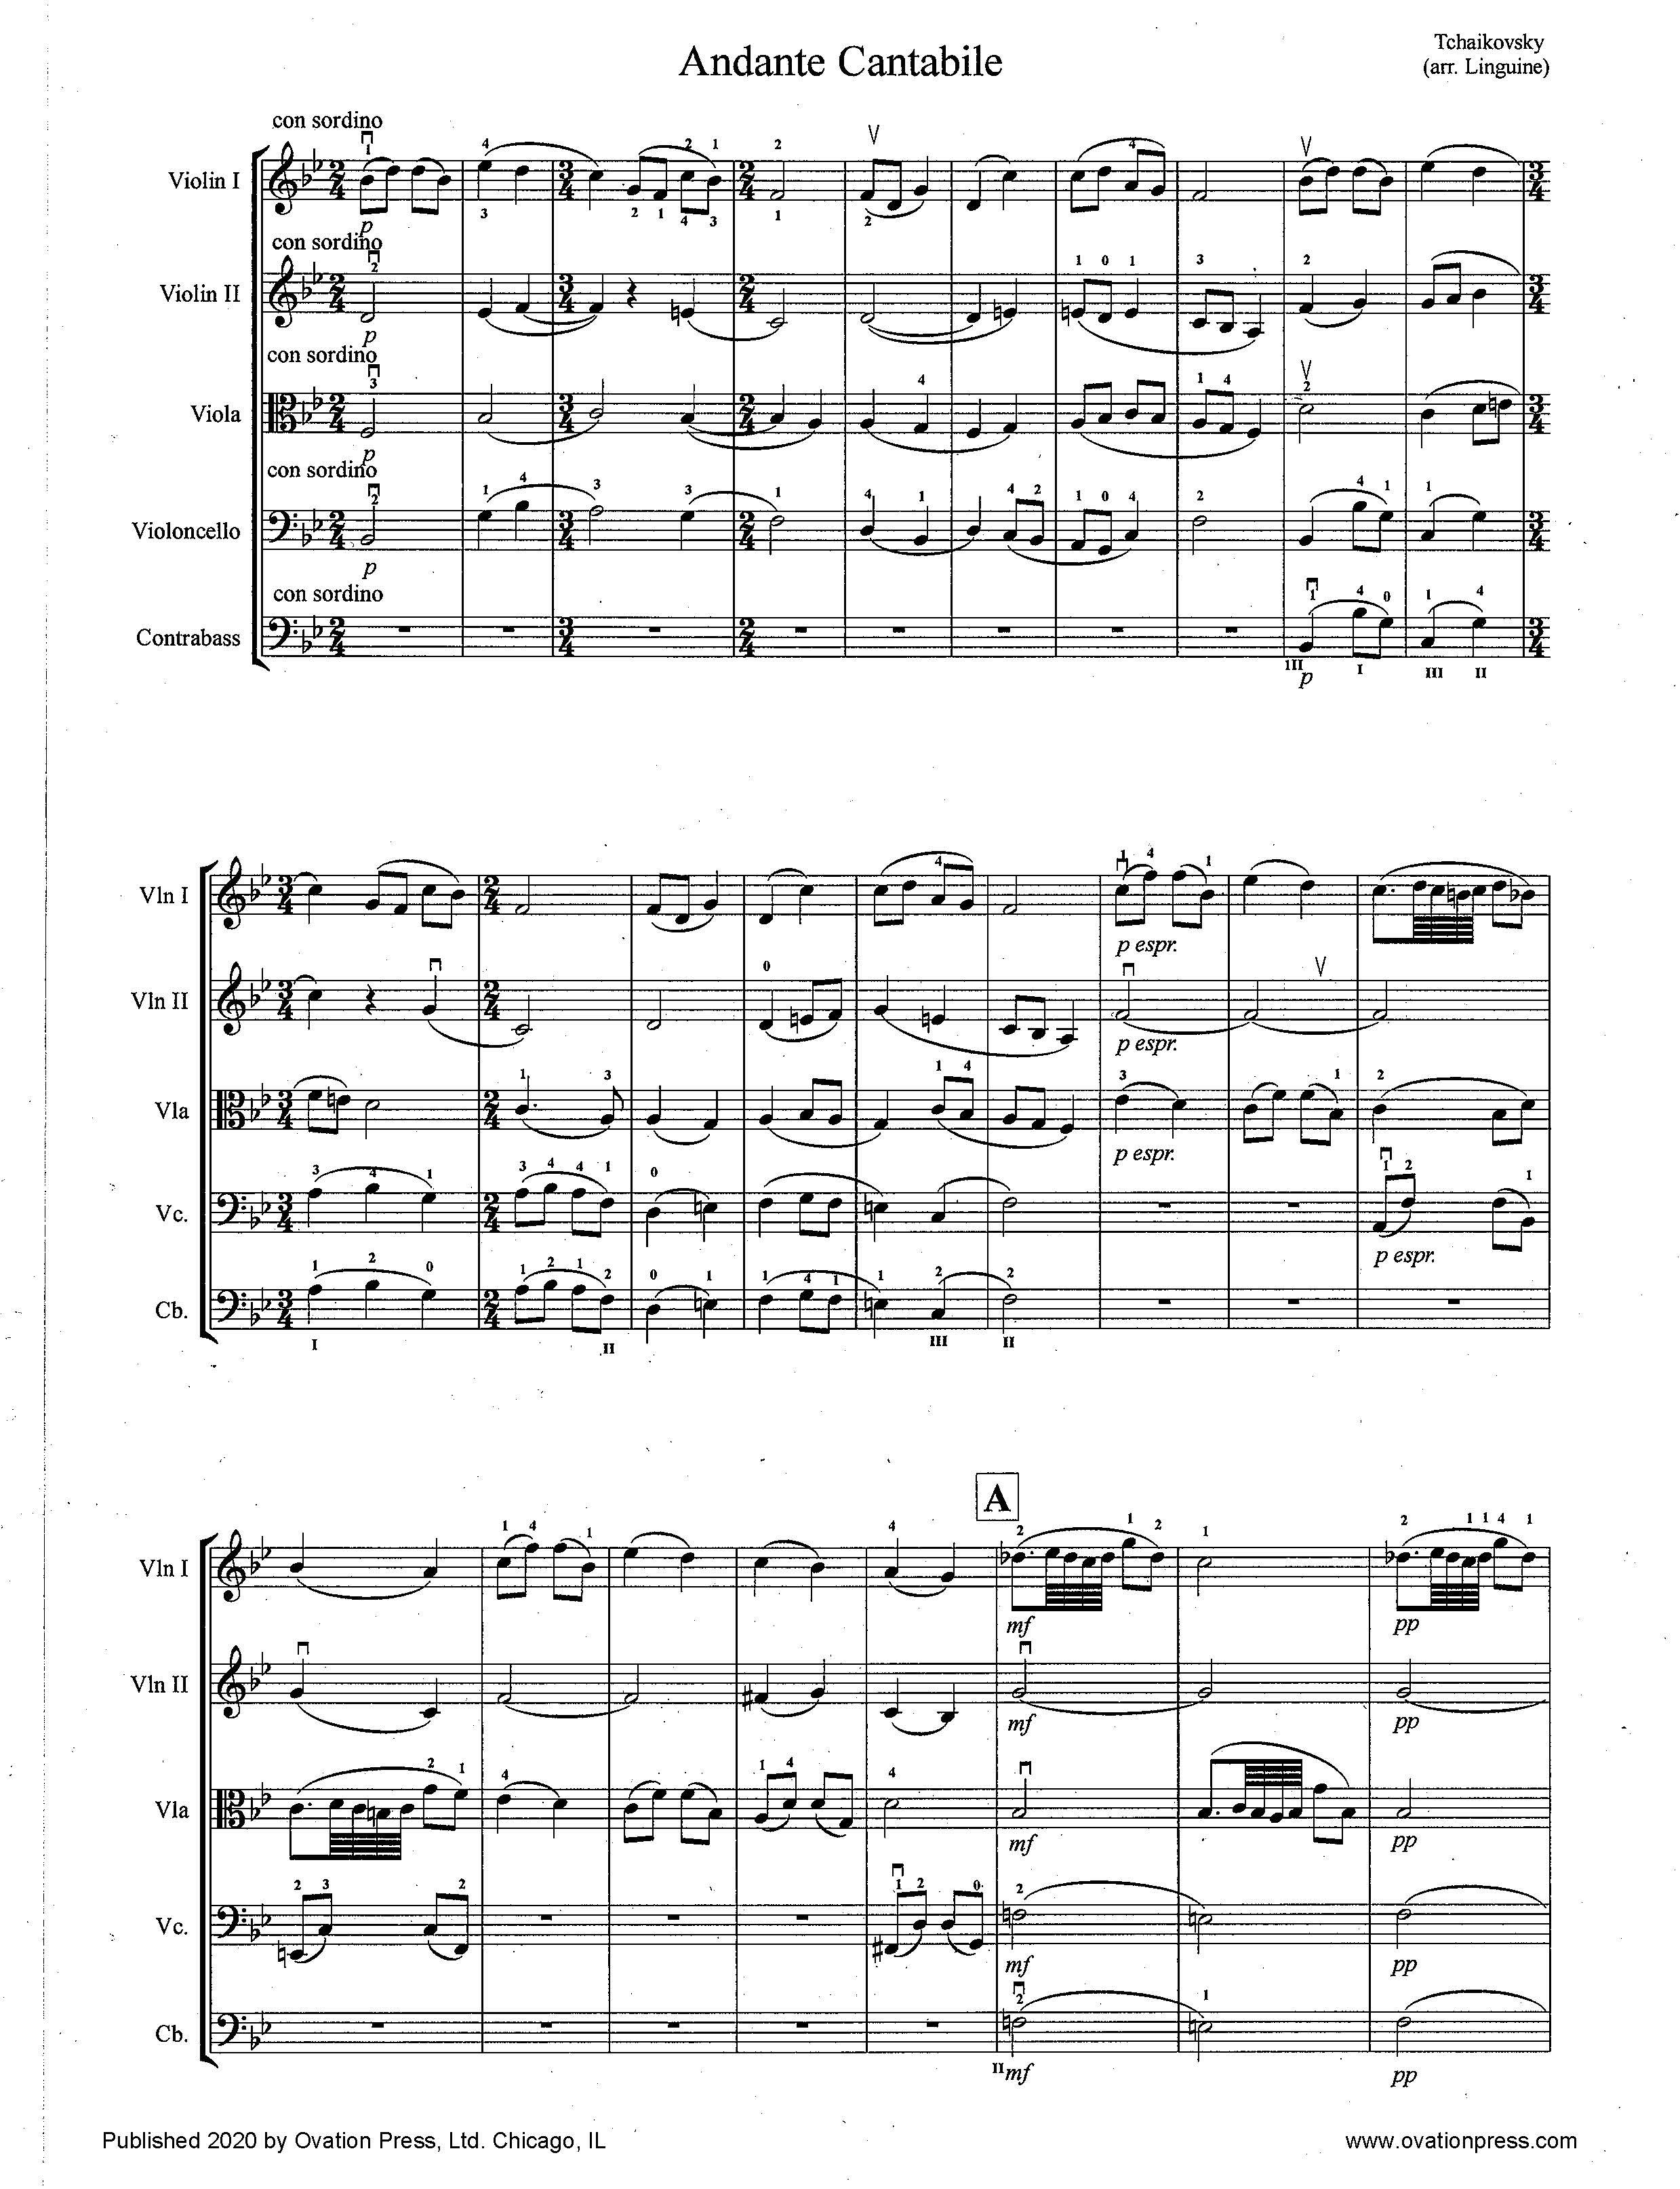 Tchaikovsky Andante Cantabile (for Intermediate String Orchestra)